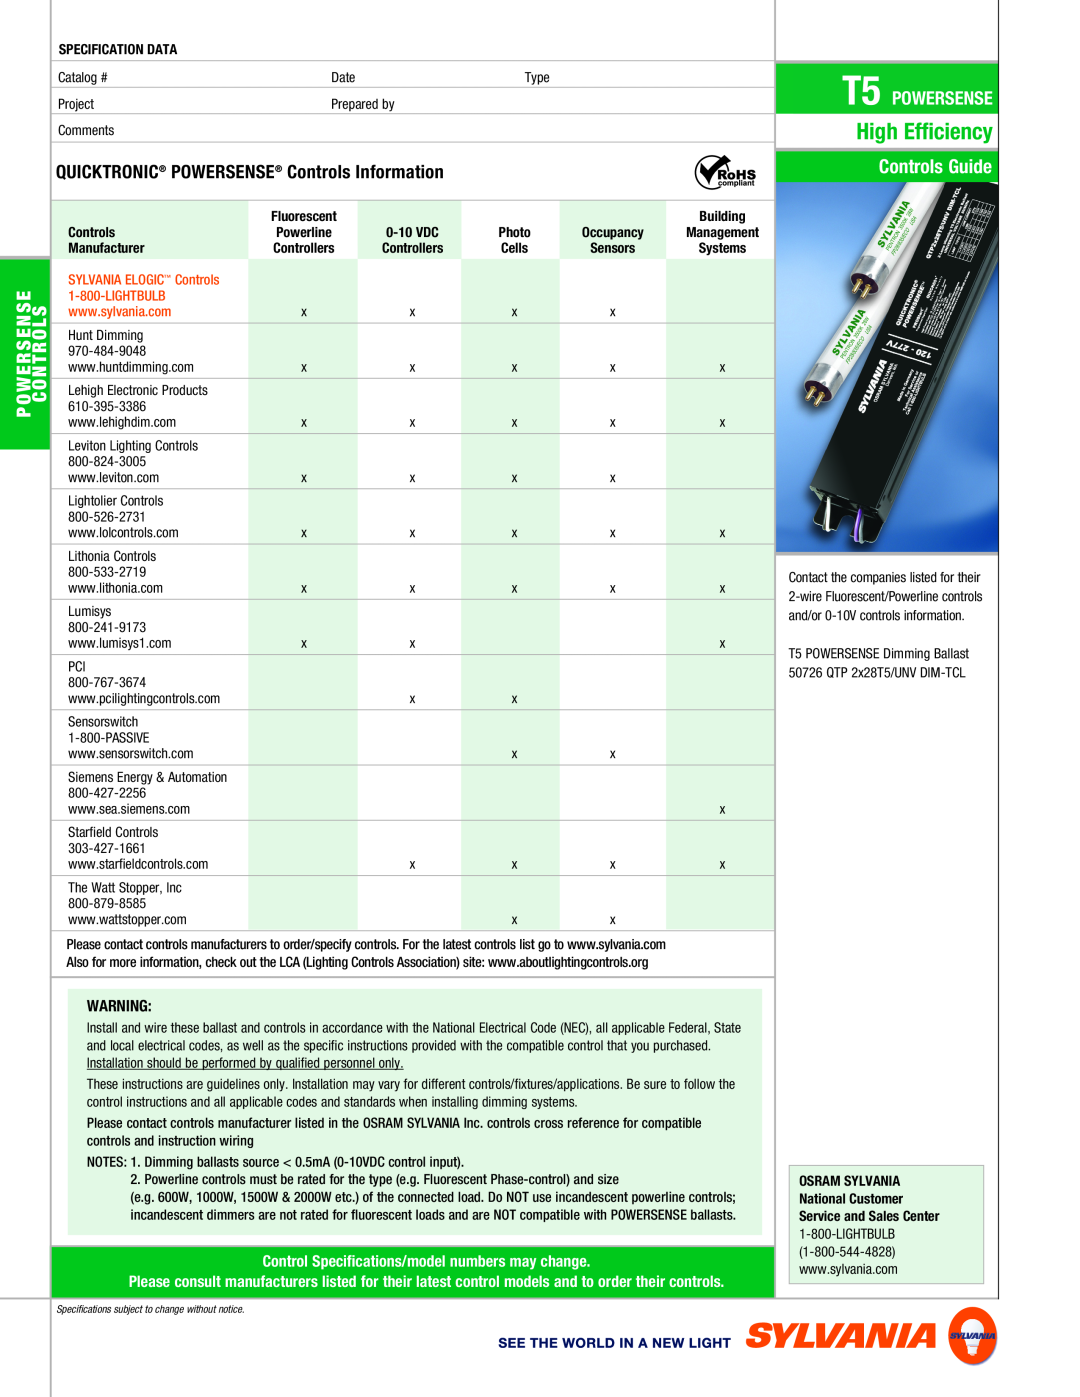 Sylvania High Efficiency, Controls Guide, QUICKTRONICPOWERSENSEControls Information, Specification Data, T5 POWERSENSE 